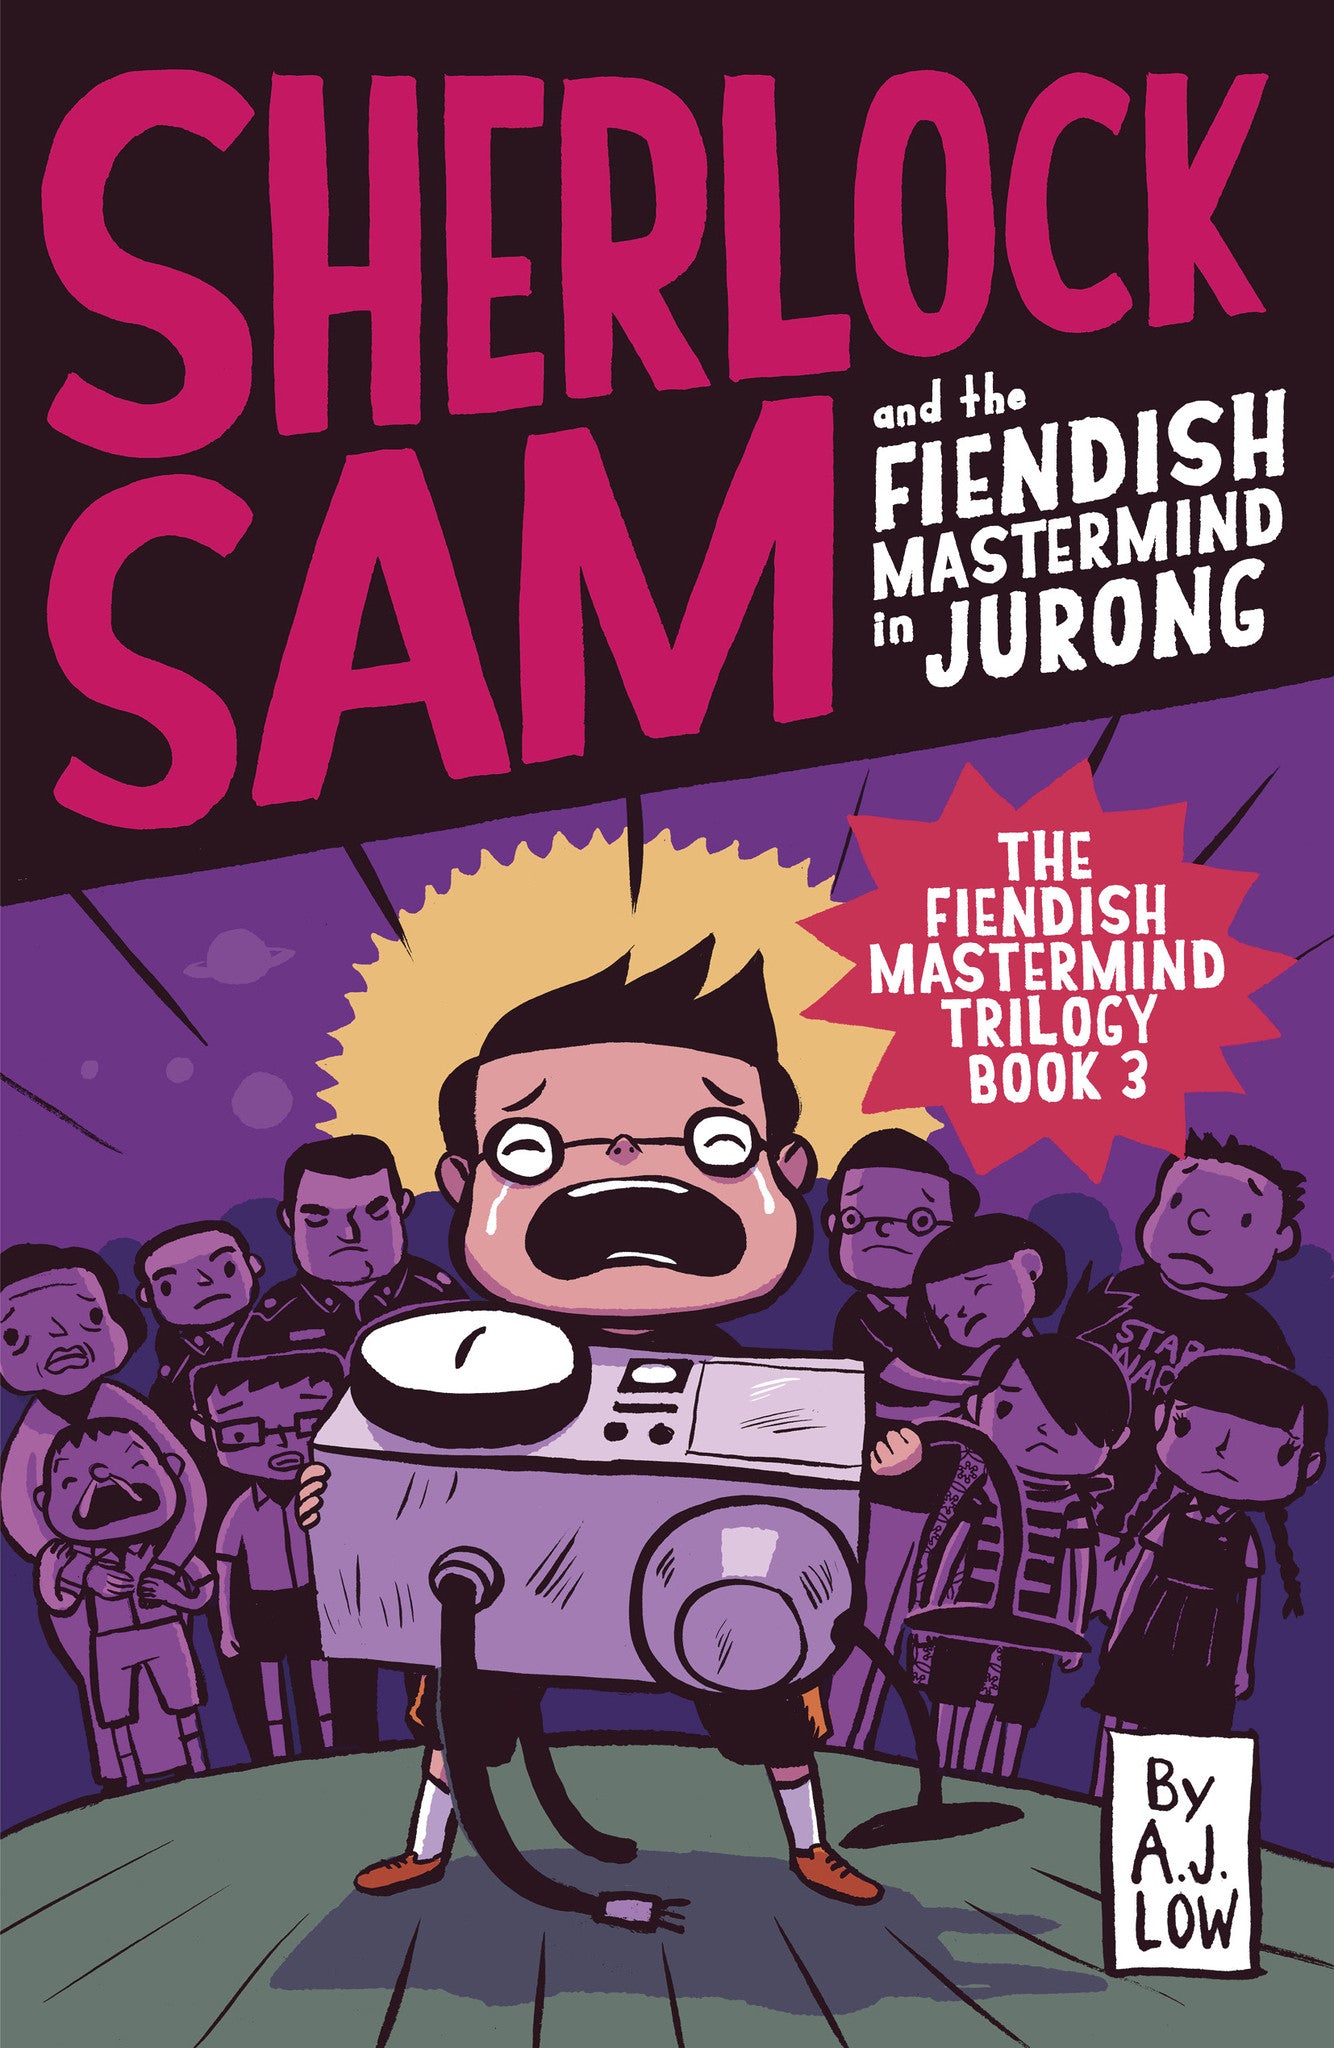 Sherlock Sam and the Fiendish Mastermind in Jurong (book 8)